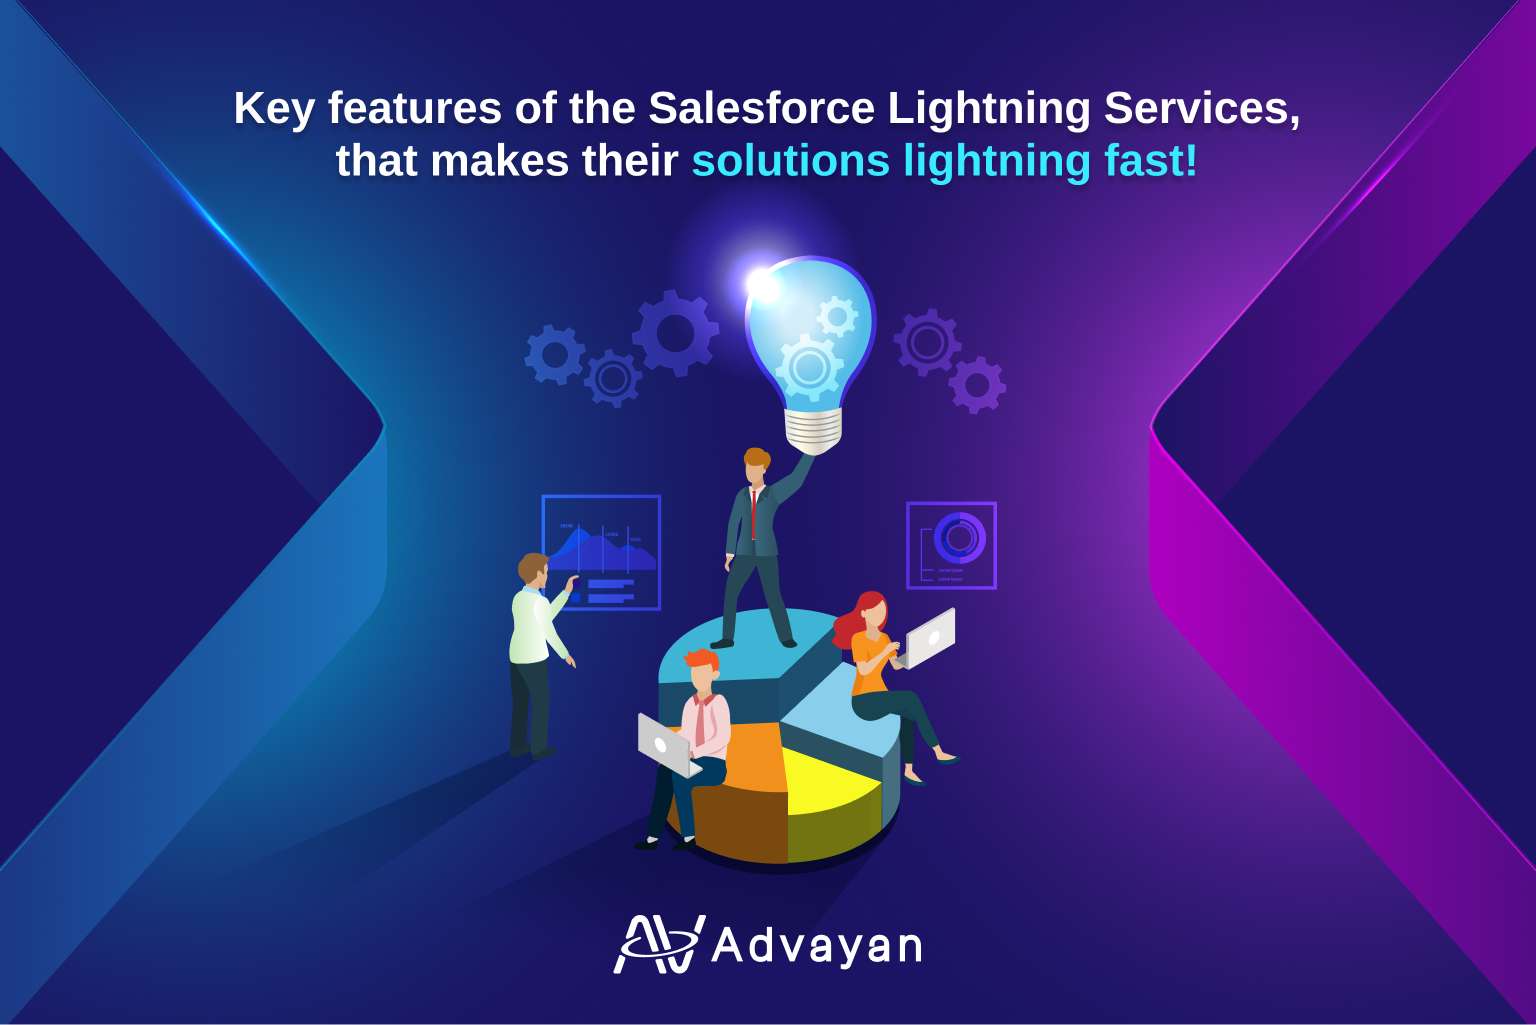 Key features of the Salesforce Lightning Services, that makes their solutions lightning fast!